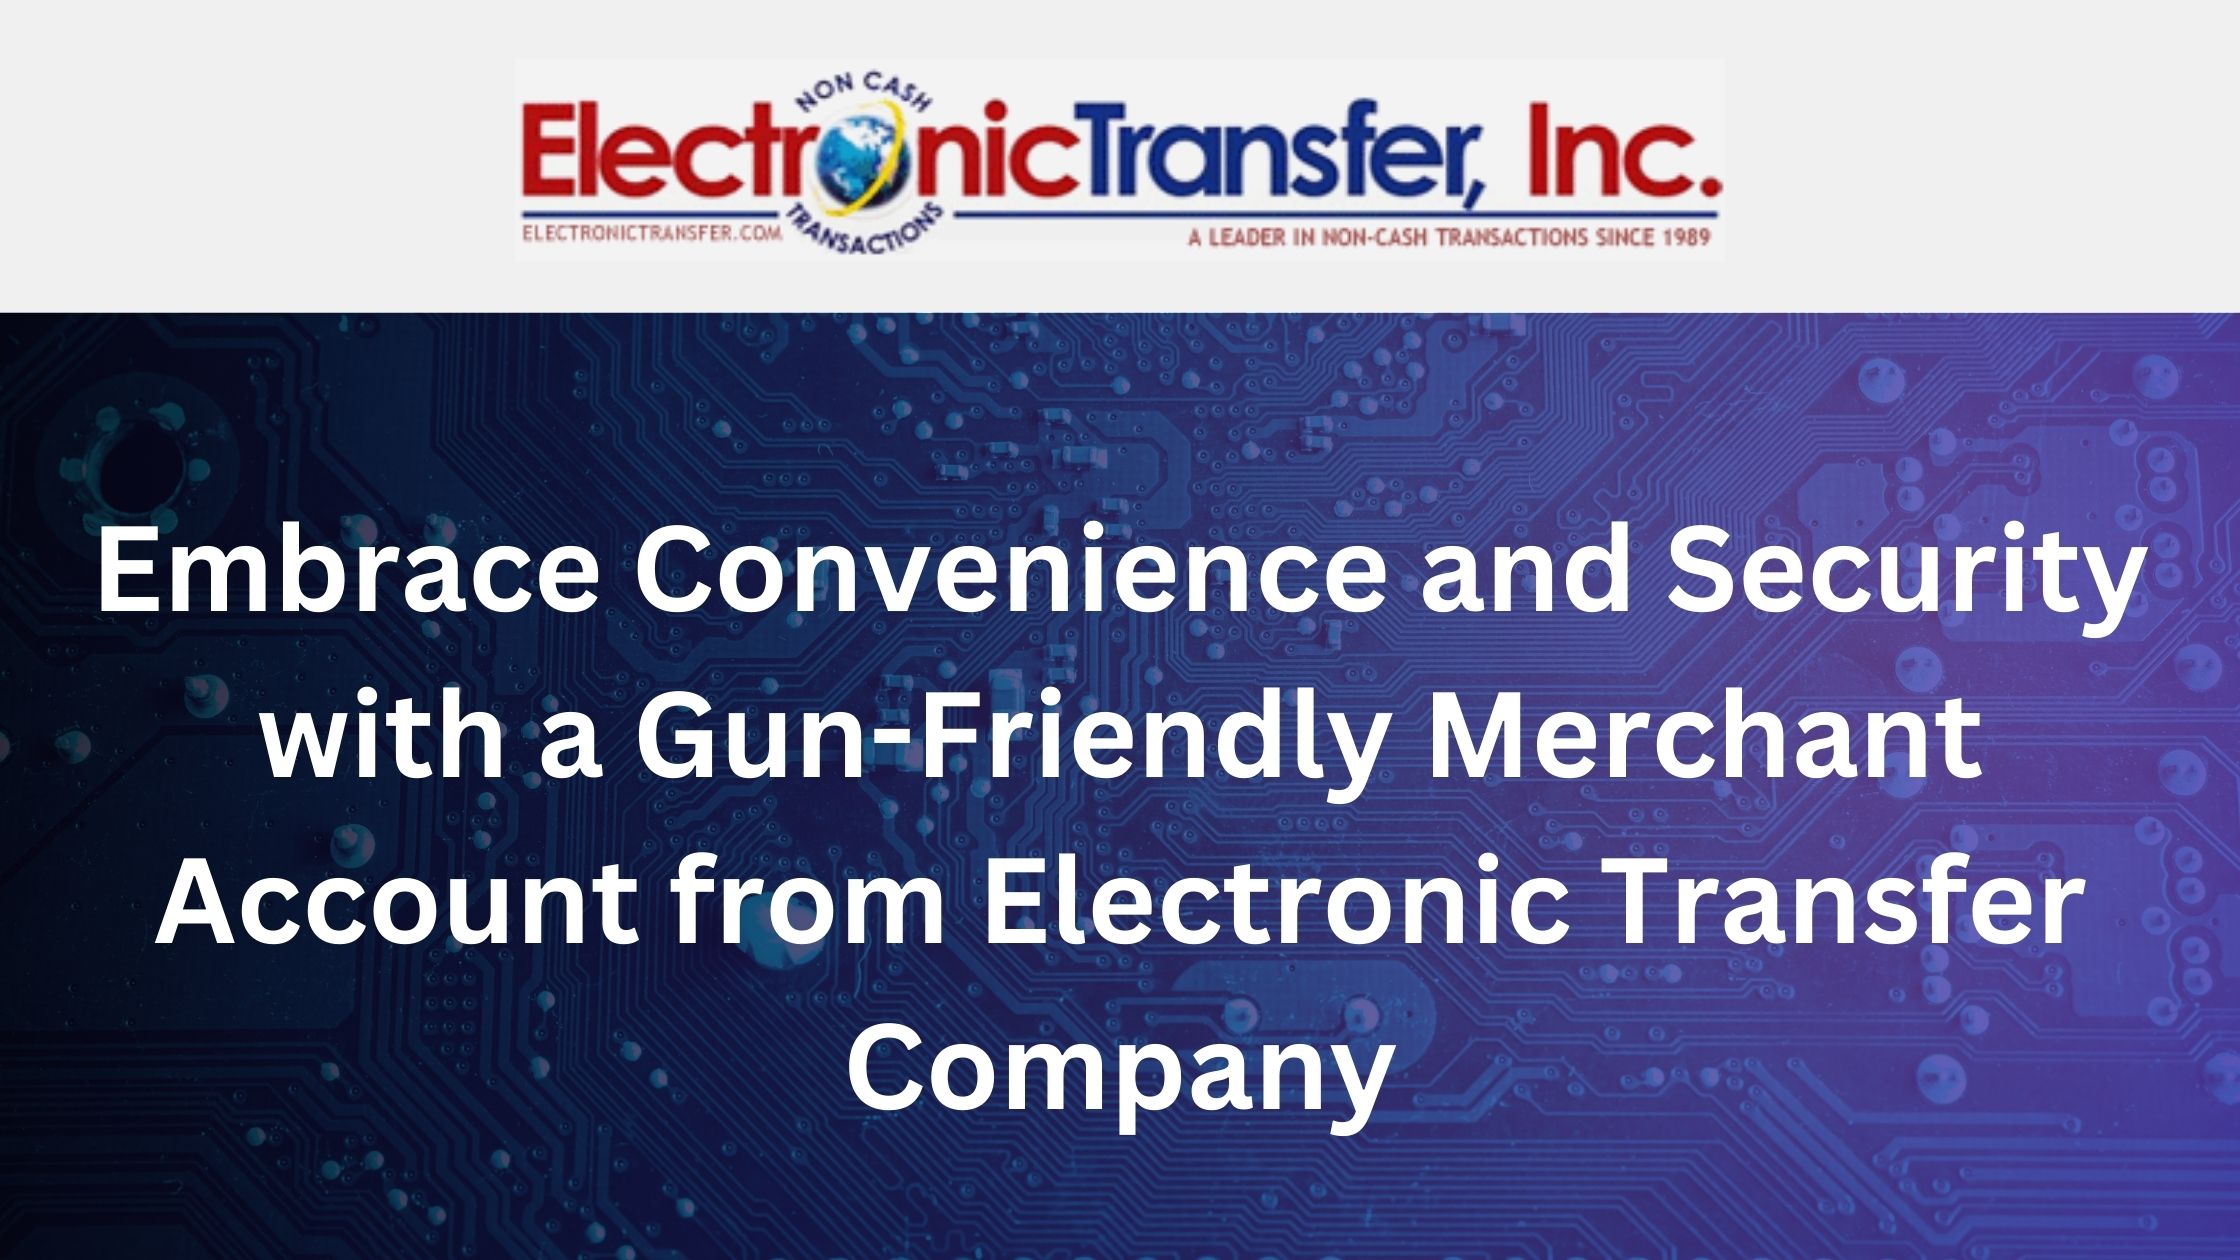 Embrace Convenience and Security with a Gun Friendly Merchant Account from Electronic Transfer Company (1)